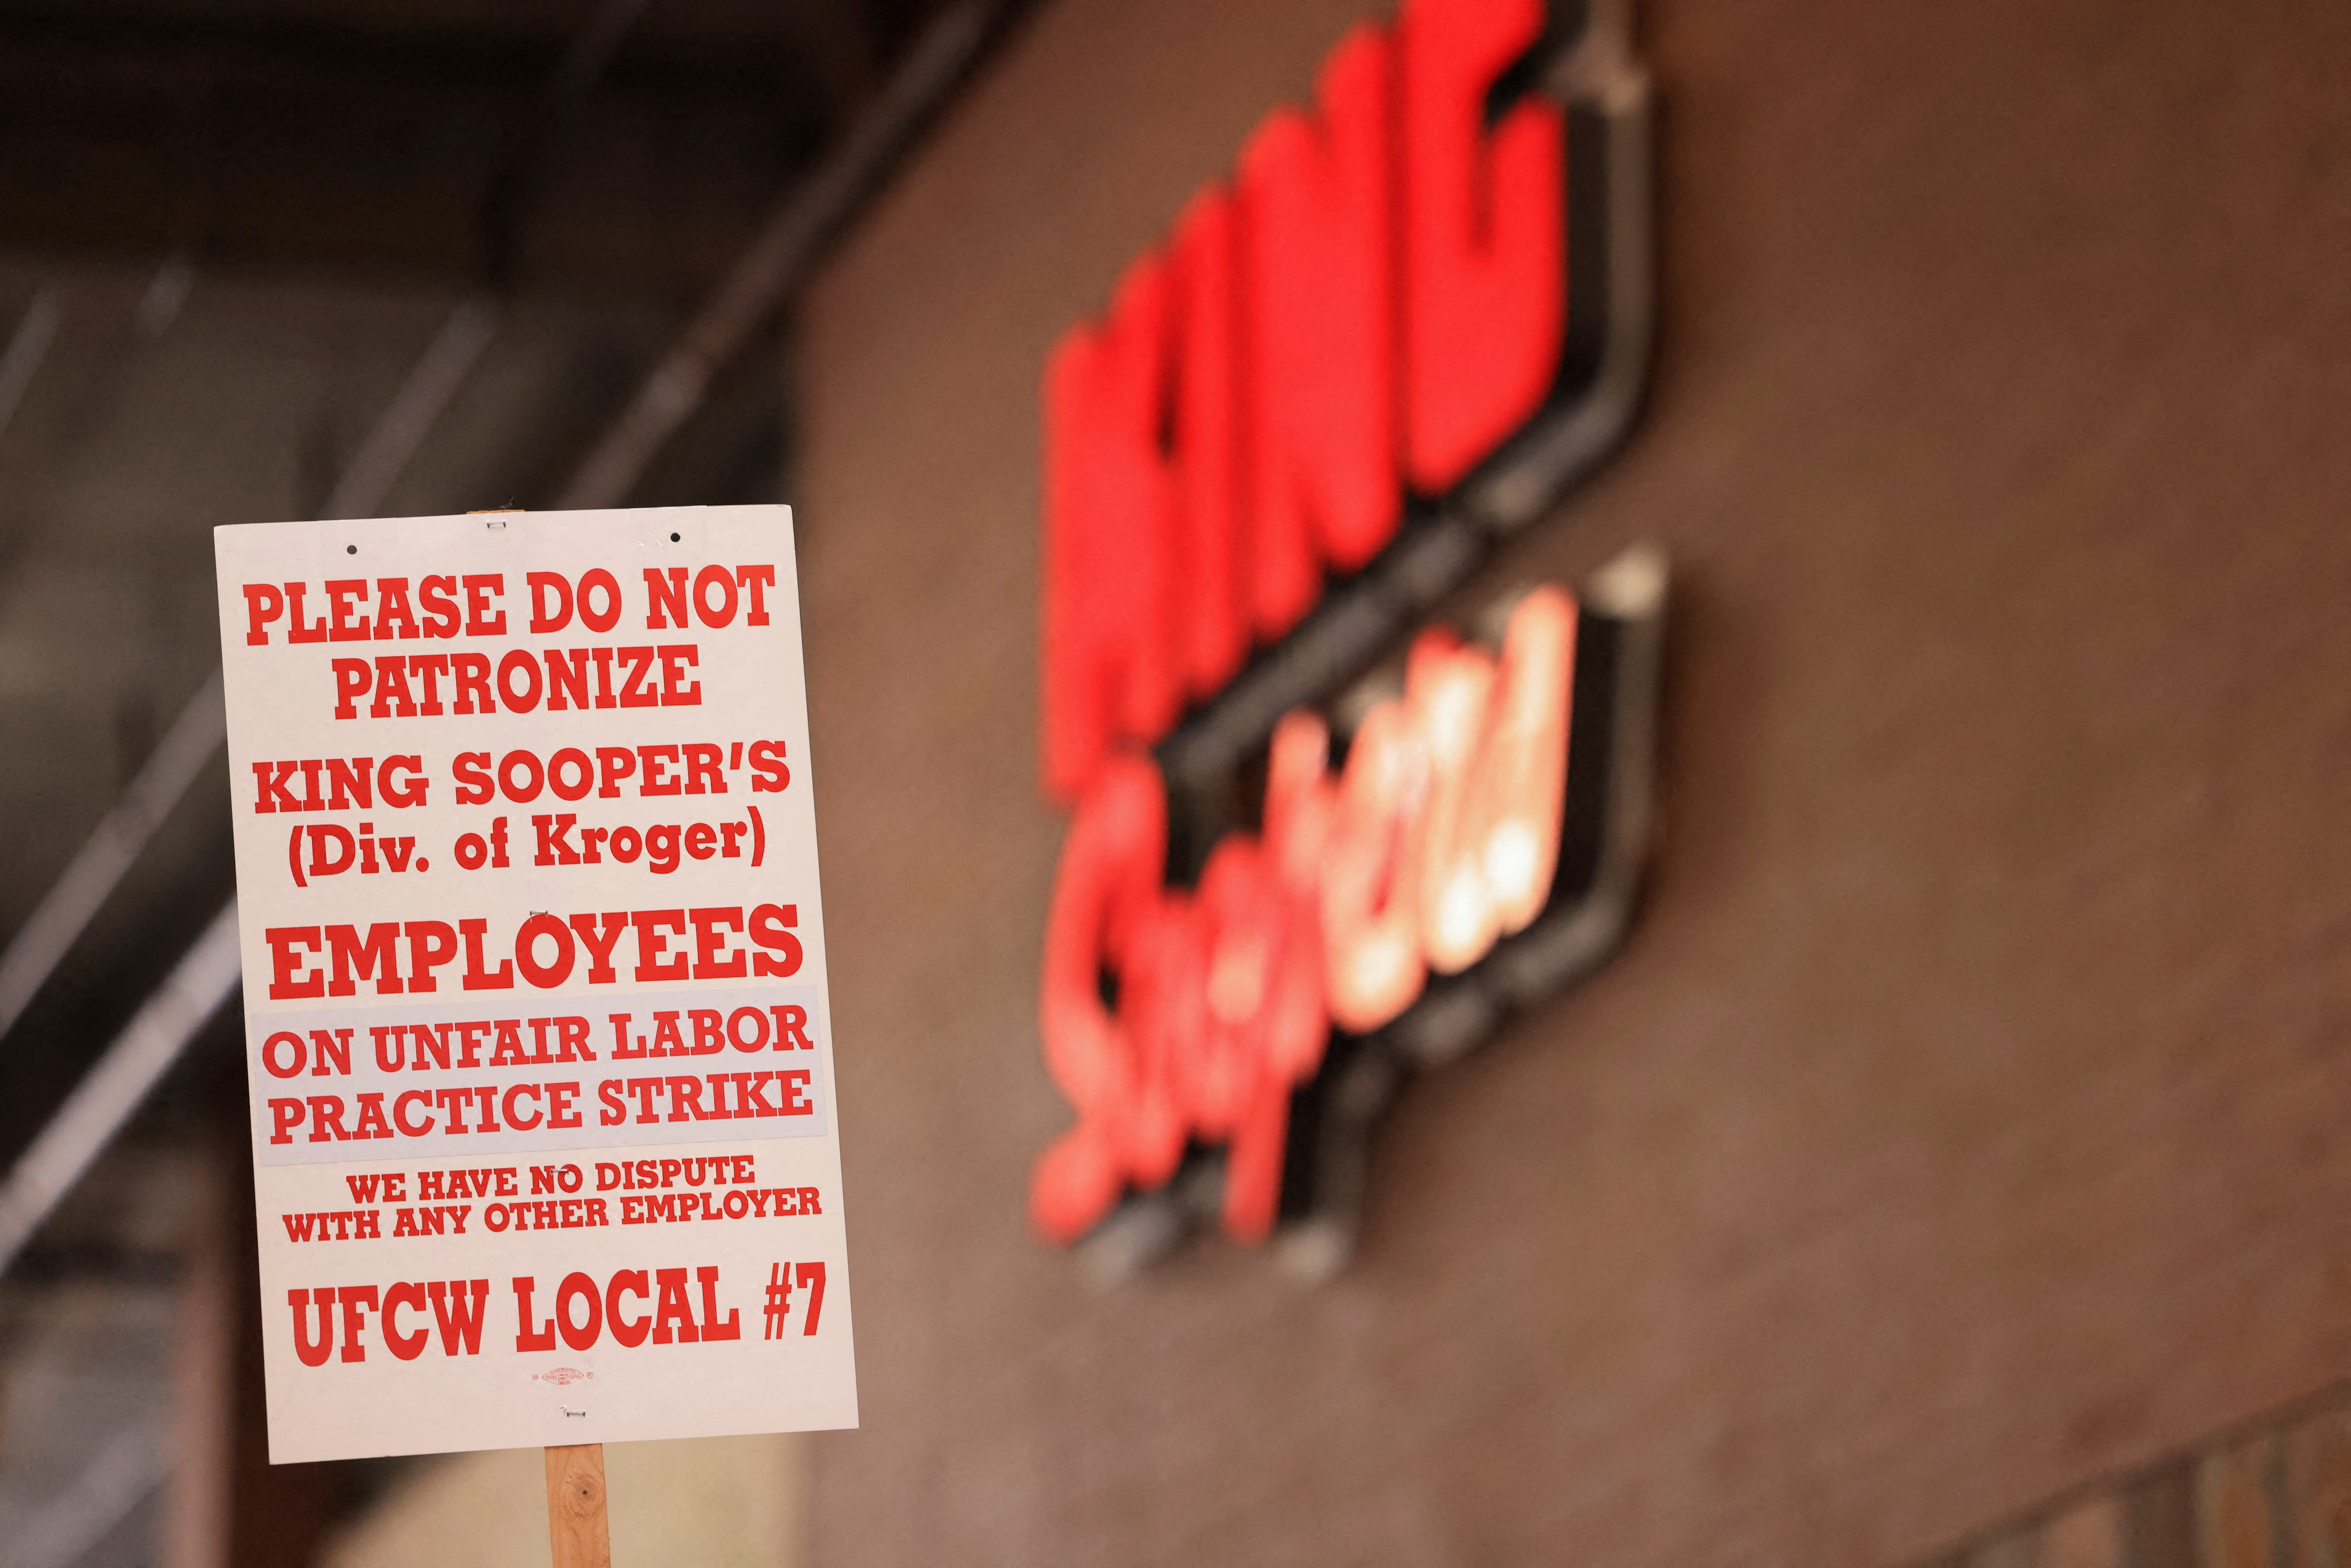 Here's why Weld County King Soopers are seeking 'temporary